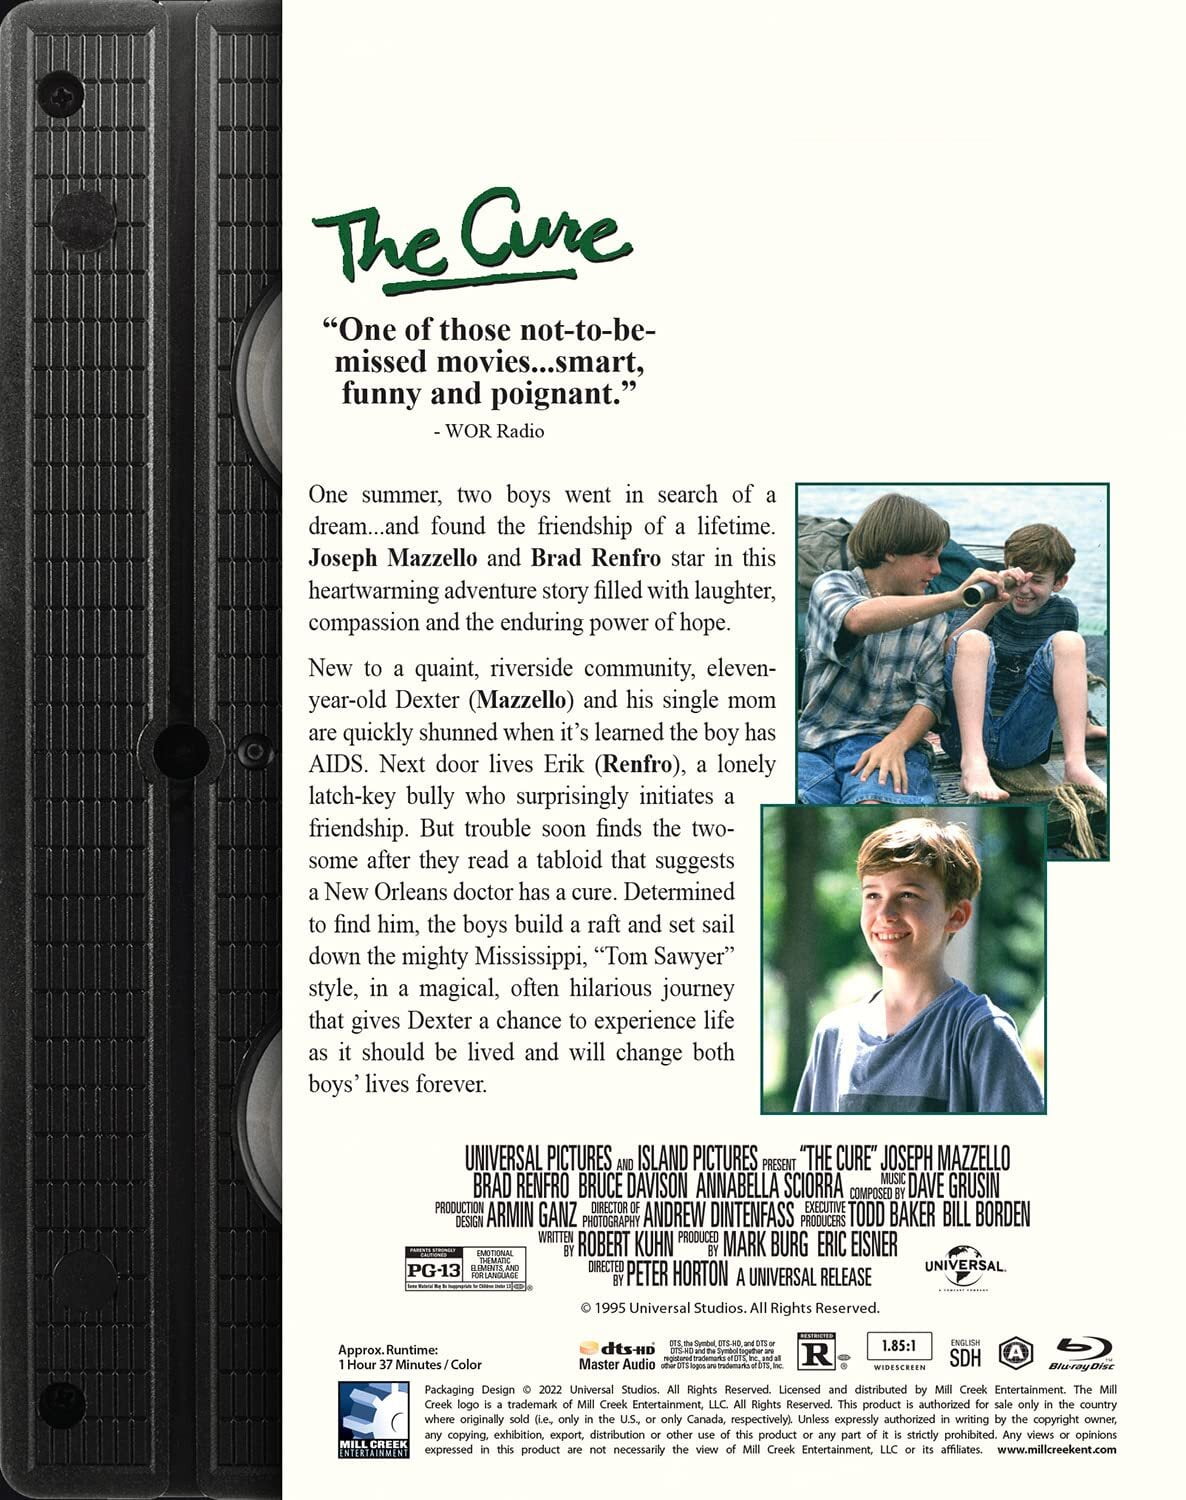 The Cure (Retro VHS Packaging) (Blu-ray), Mill Creek, Drama